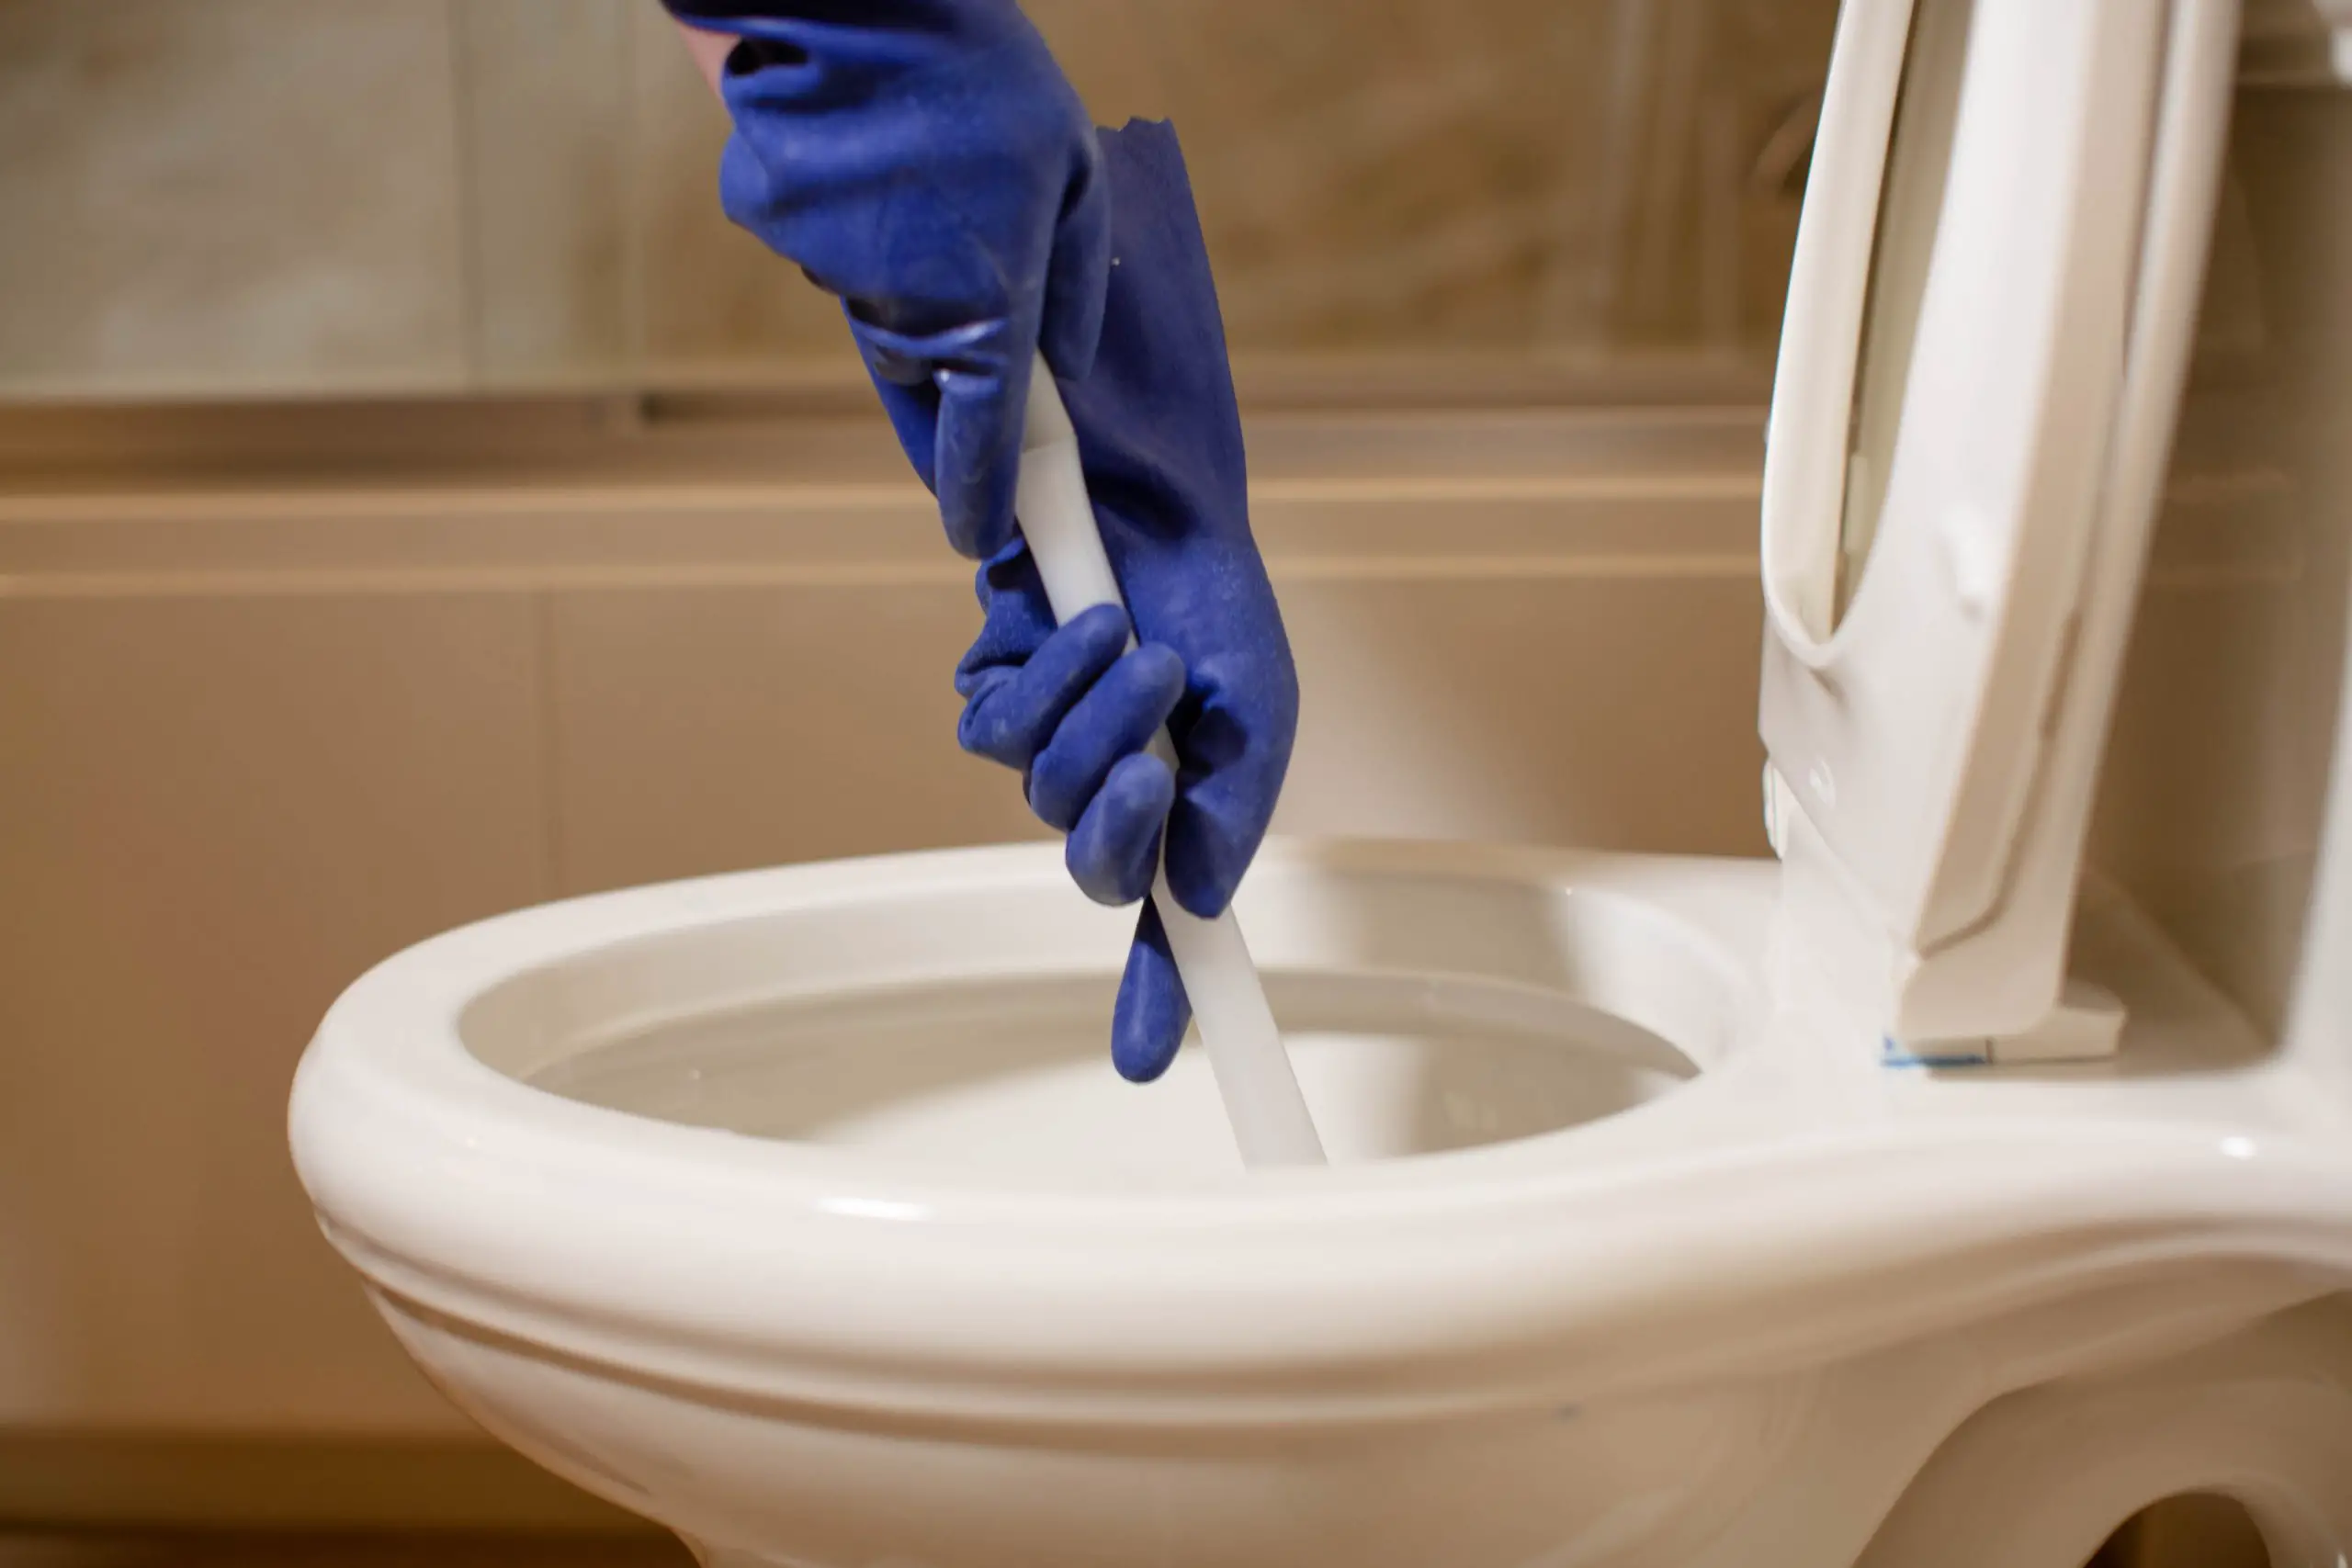 How to Fix a Toilet That Won't Flush Unless You Hold the Handle Down